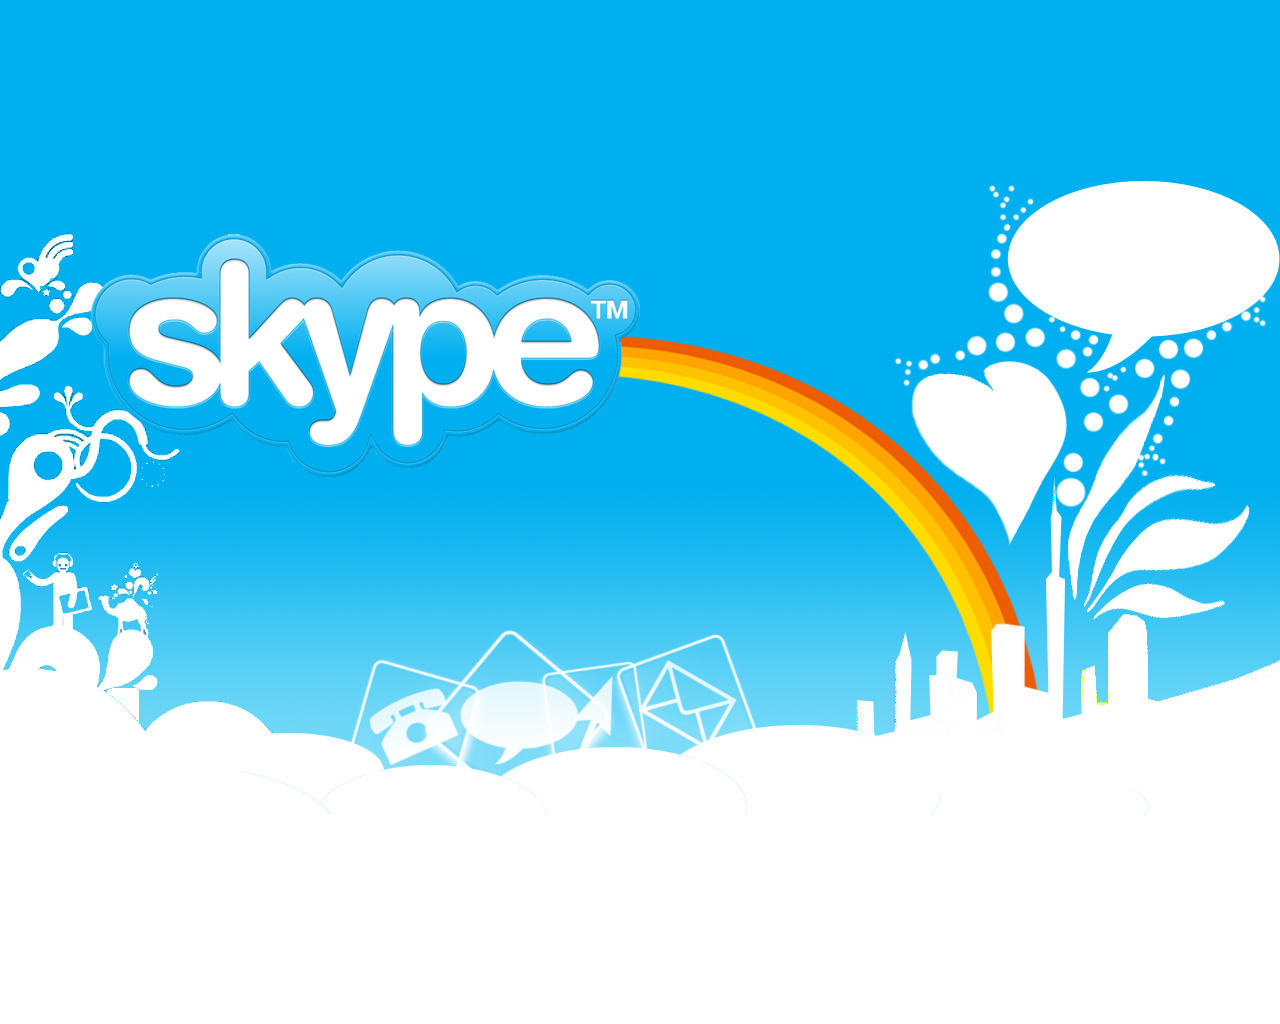 Will Skype lead the VoIP market?